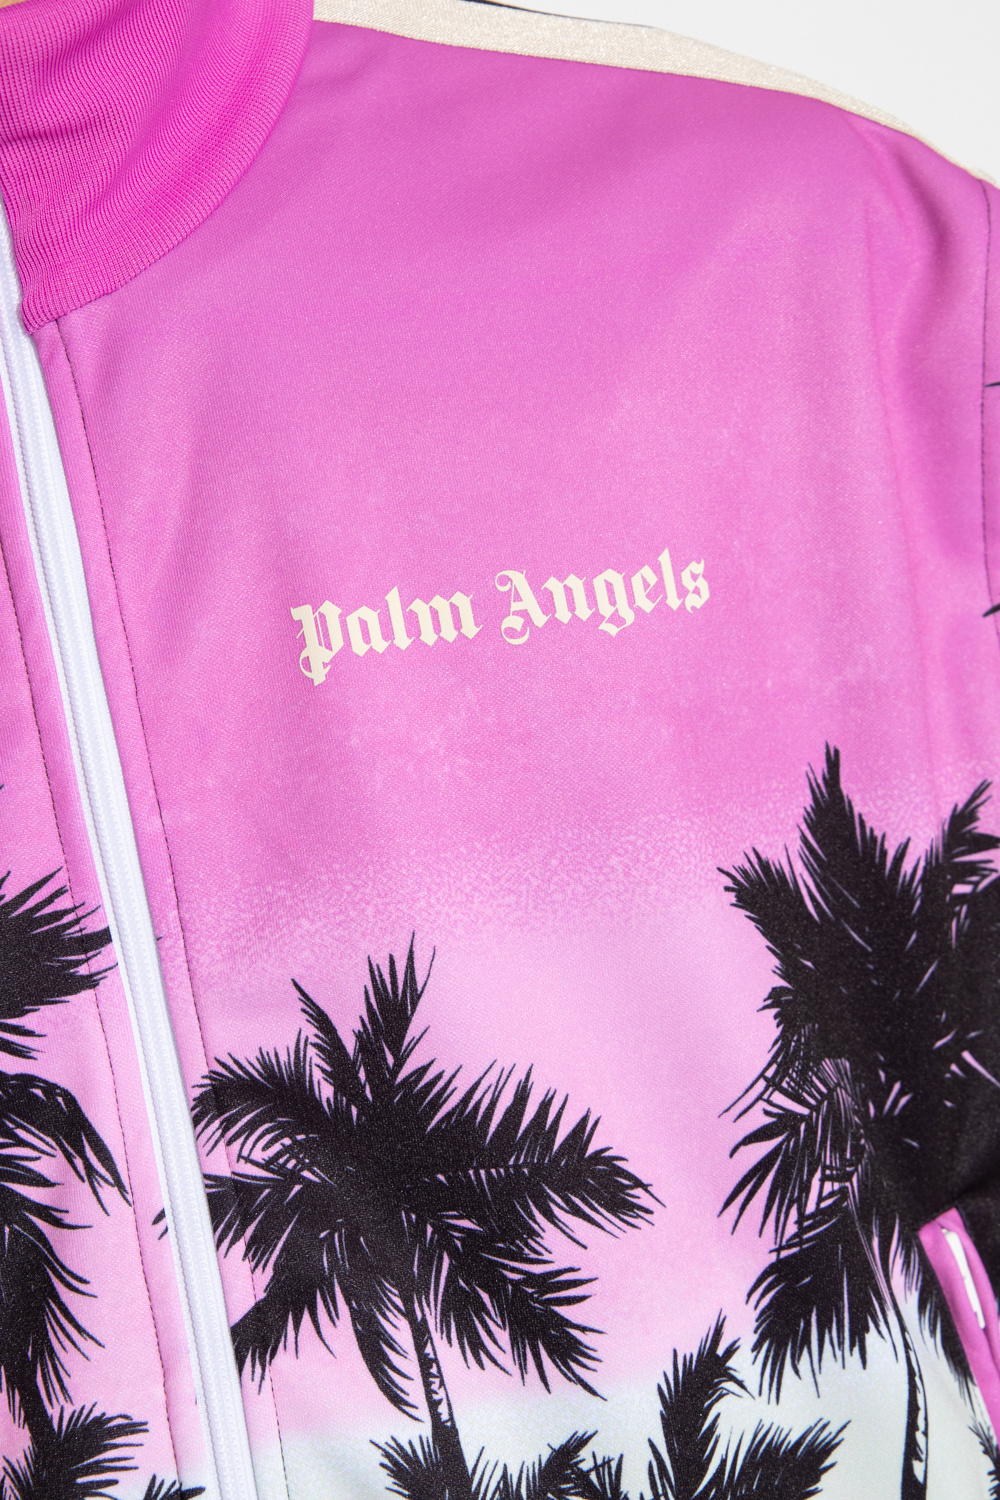 Palm Angels EARN THE TITLE OF THE BEST DRESSED GUEST